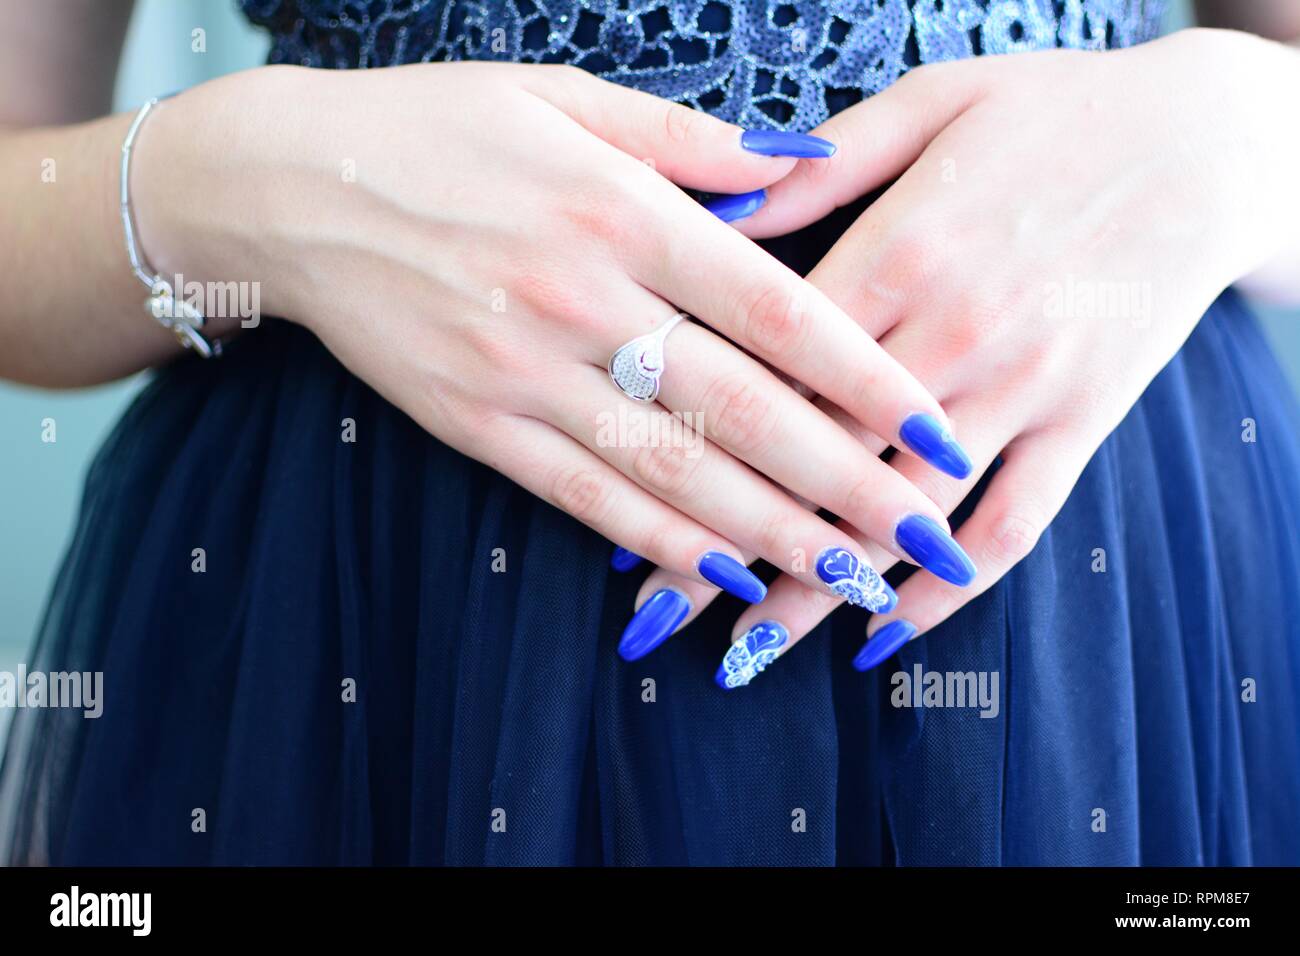 Which Nail Colors Are for a Summer Navy Dress? : Style With Ease - YouTube